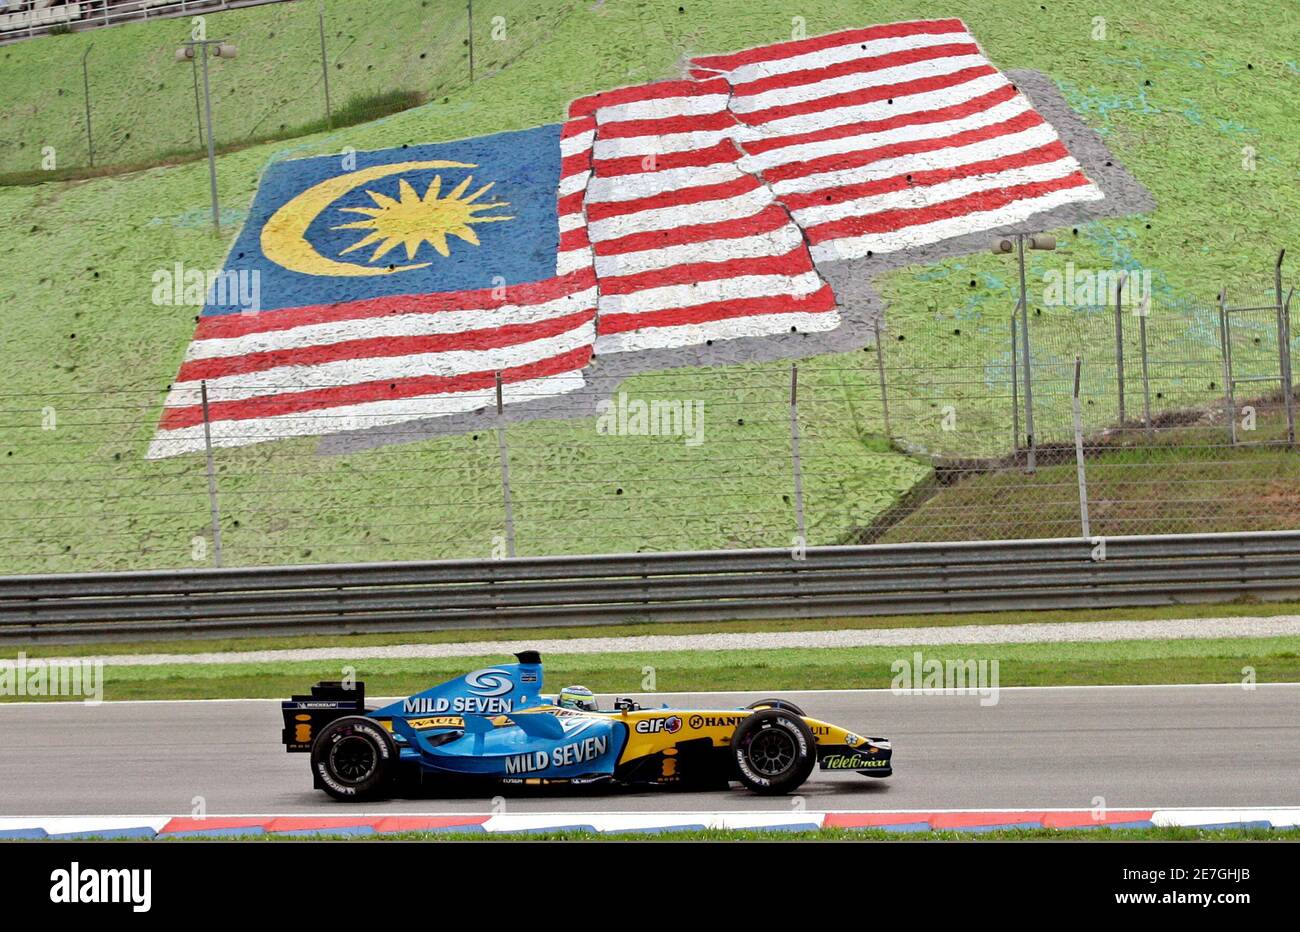 Renault Formula One driver Giancarlo Fisichella of Italy speeds past Malaysia's national flag at the Malaysian F1 Grand Prix in Sepang, near Kuala Lumpur March 19, 2006. Stock Photo